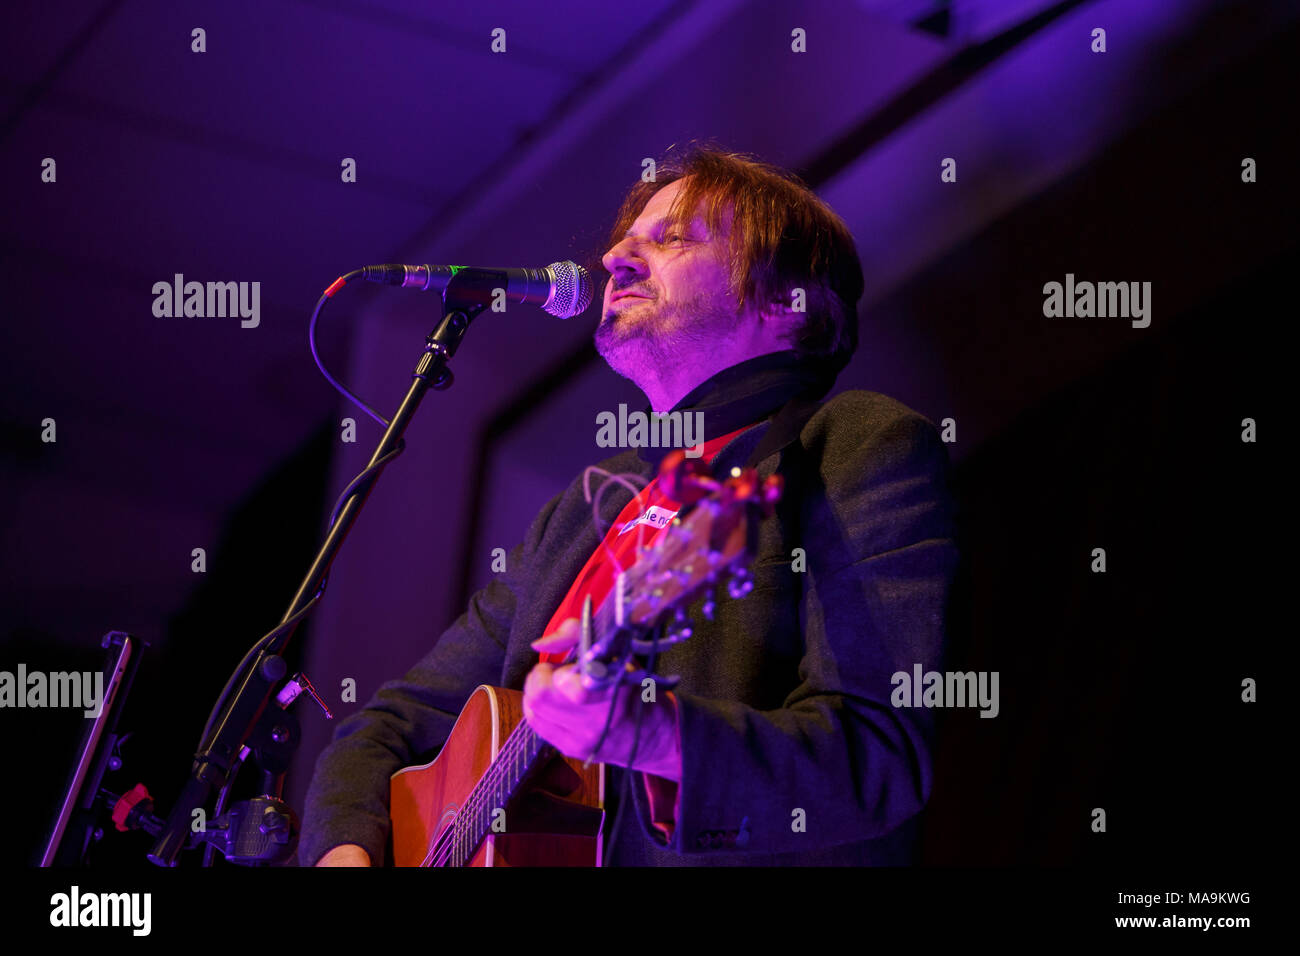 Nantwich, Cheshire, UK. 30th March, 2018. Nigel Stonier performs live at the Nantwich Civic Hall as the support act for Thea Gilmore during the 22nd Nantwich Jazz, Blues and Music Festival. Credit: Simon Newbury/Alamy Live News Stock Photo